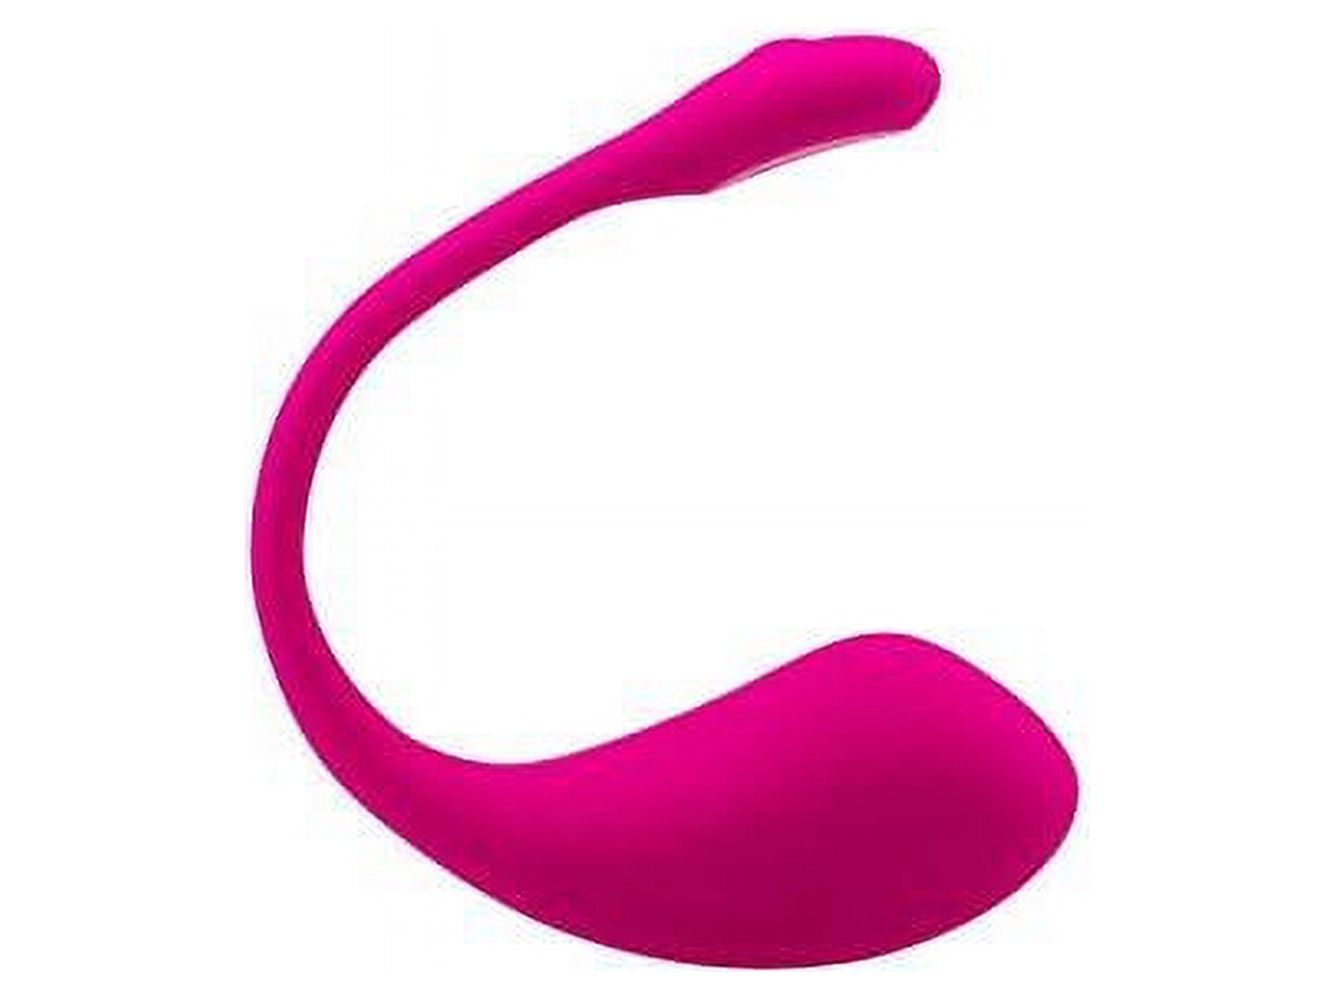 Lovense Lush 2 App Controlled Bullet Vibrator for Women, Powerful & Wireless - image 1 of 6